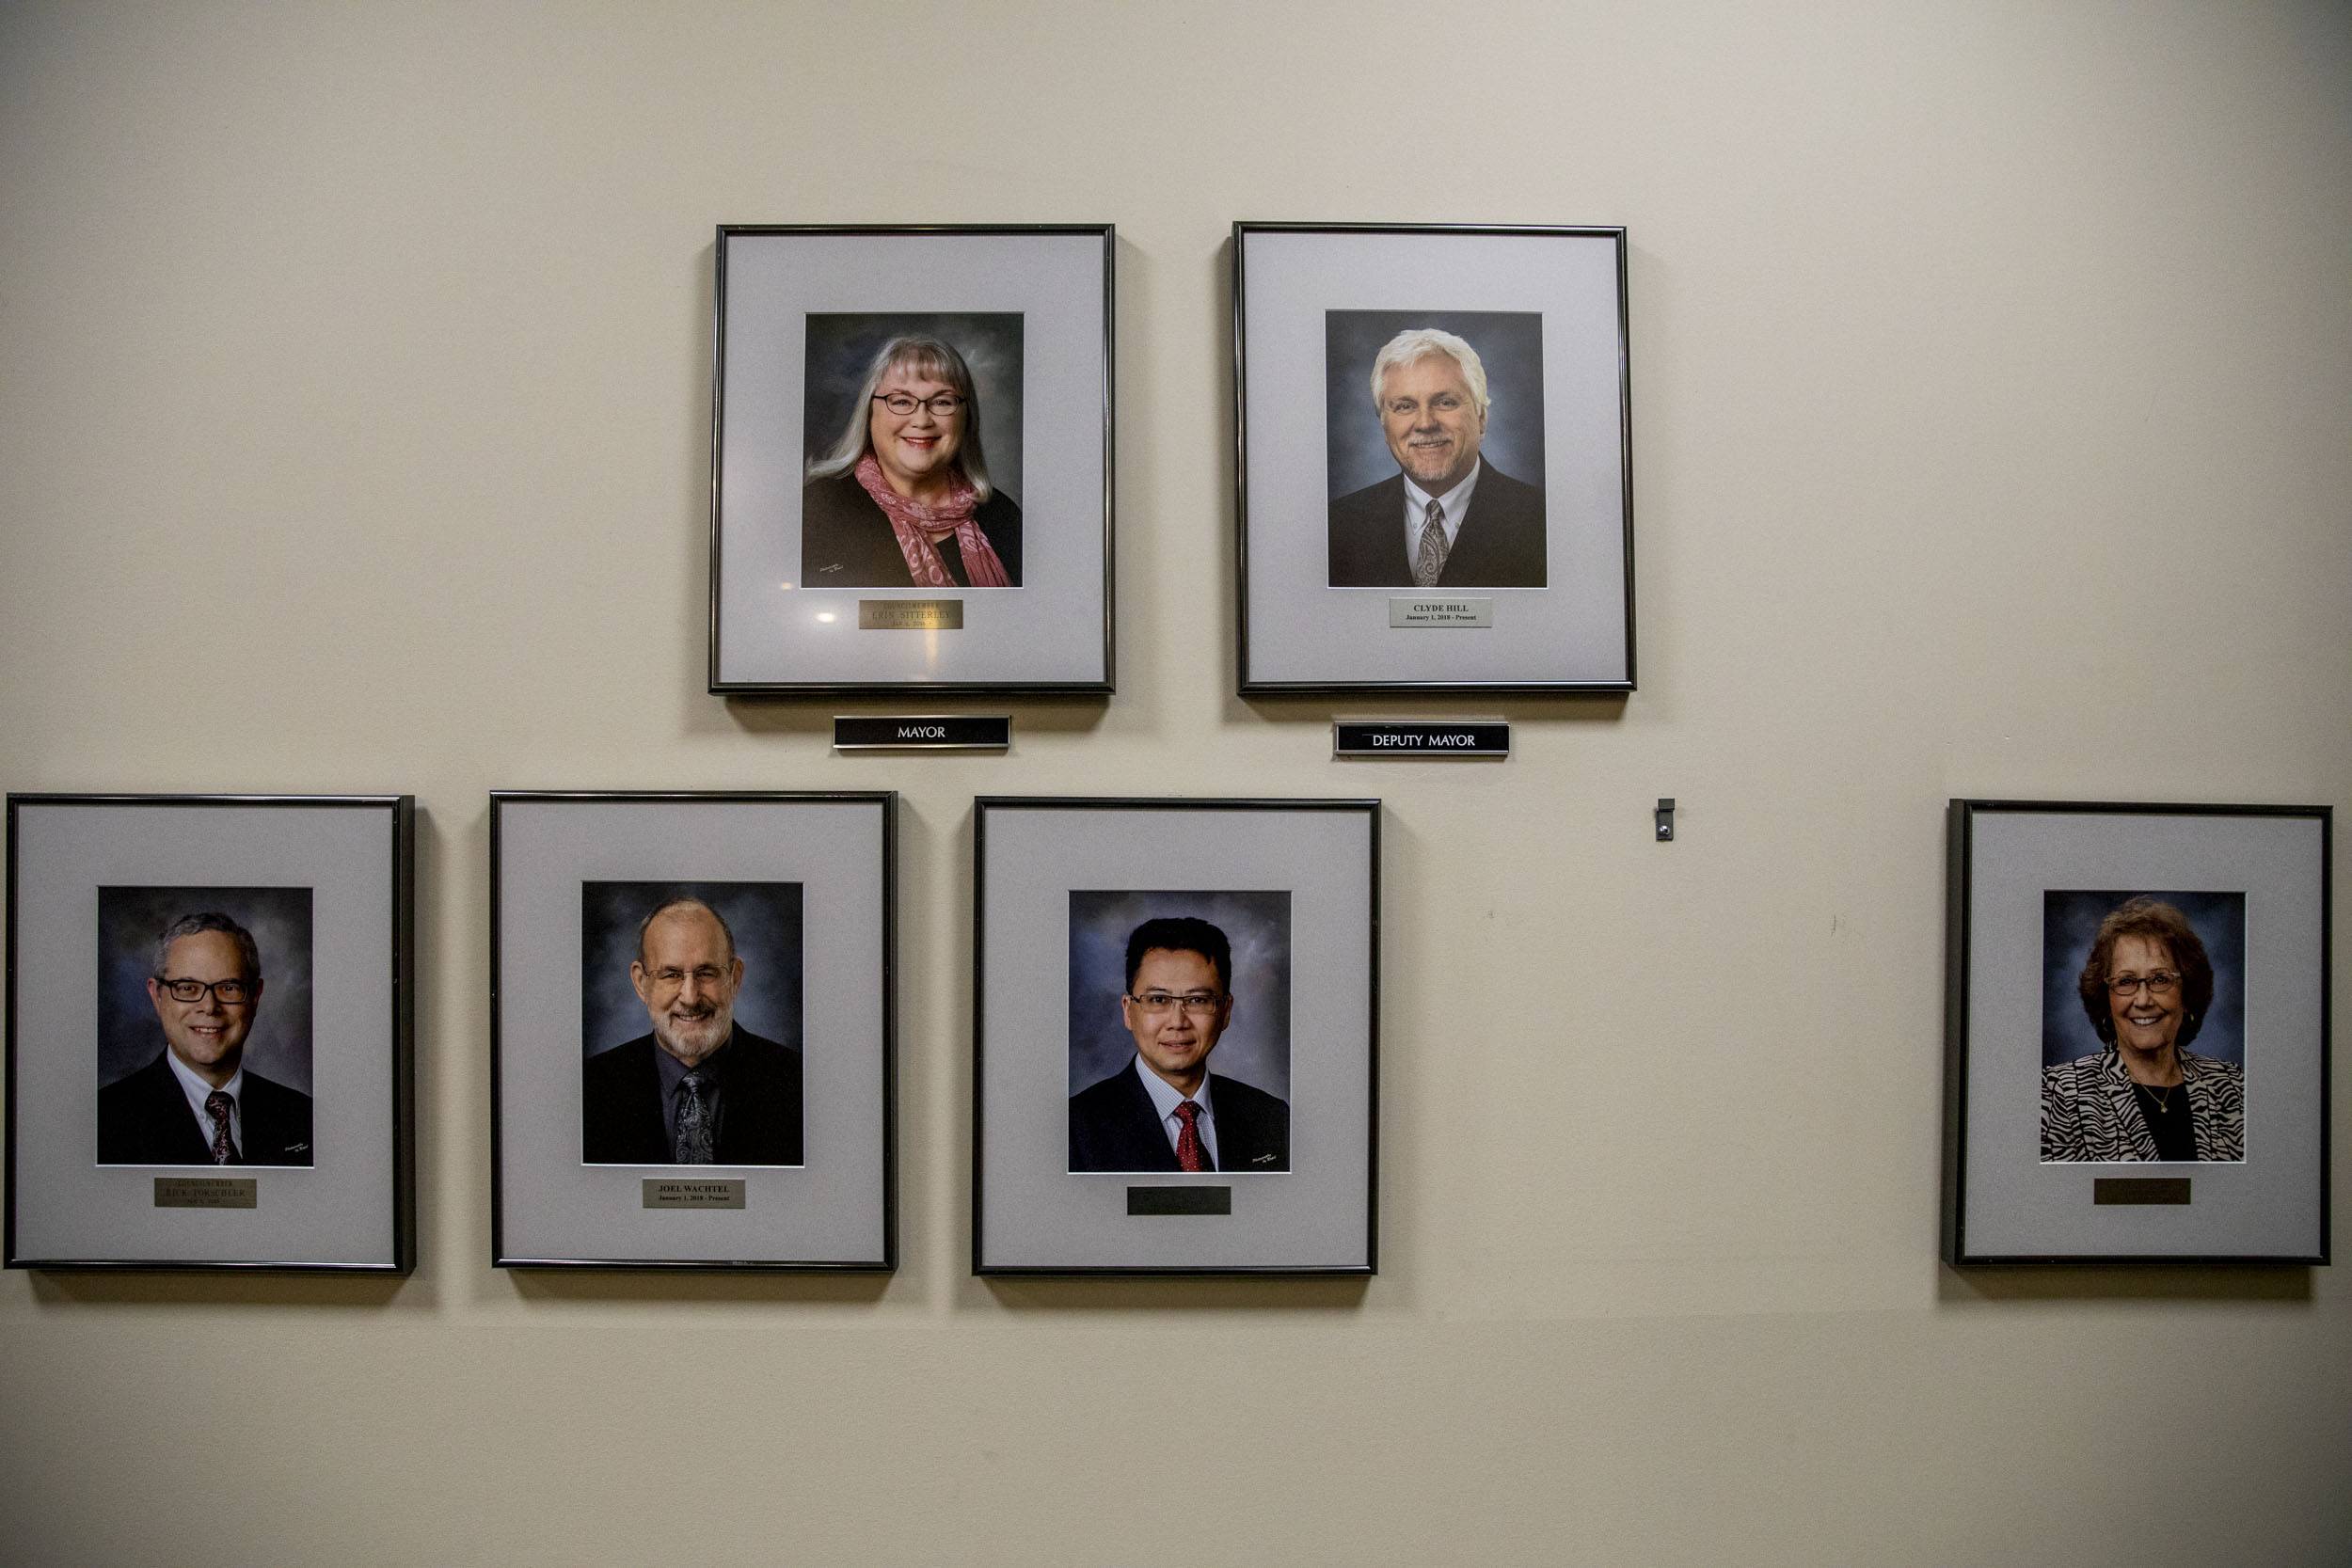 Photos of each SeaTac councilmember on a wall and a blank space where the new councilmember's headshot will be